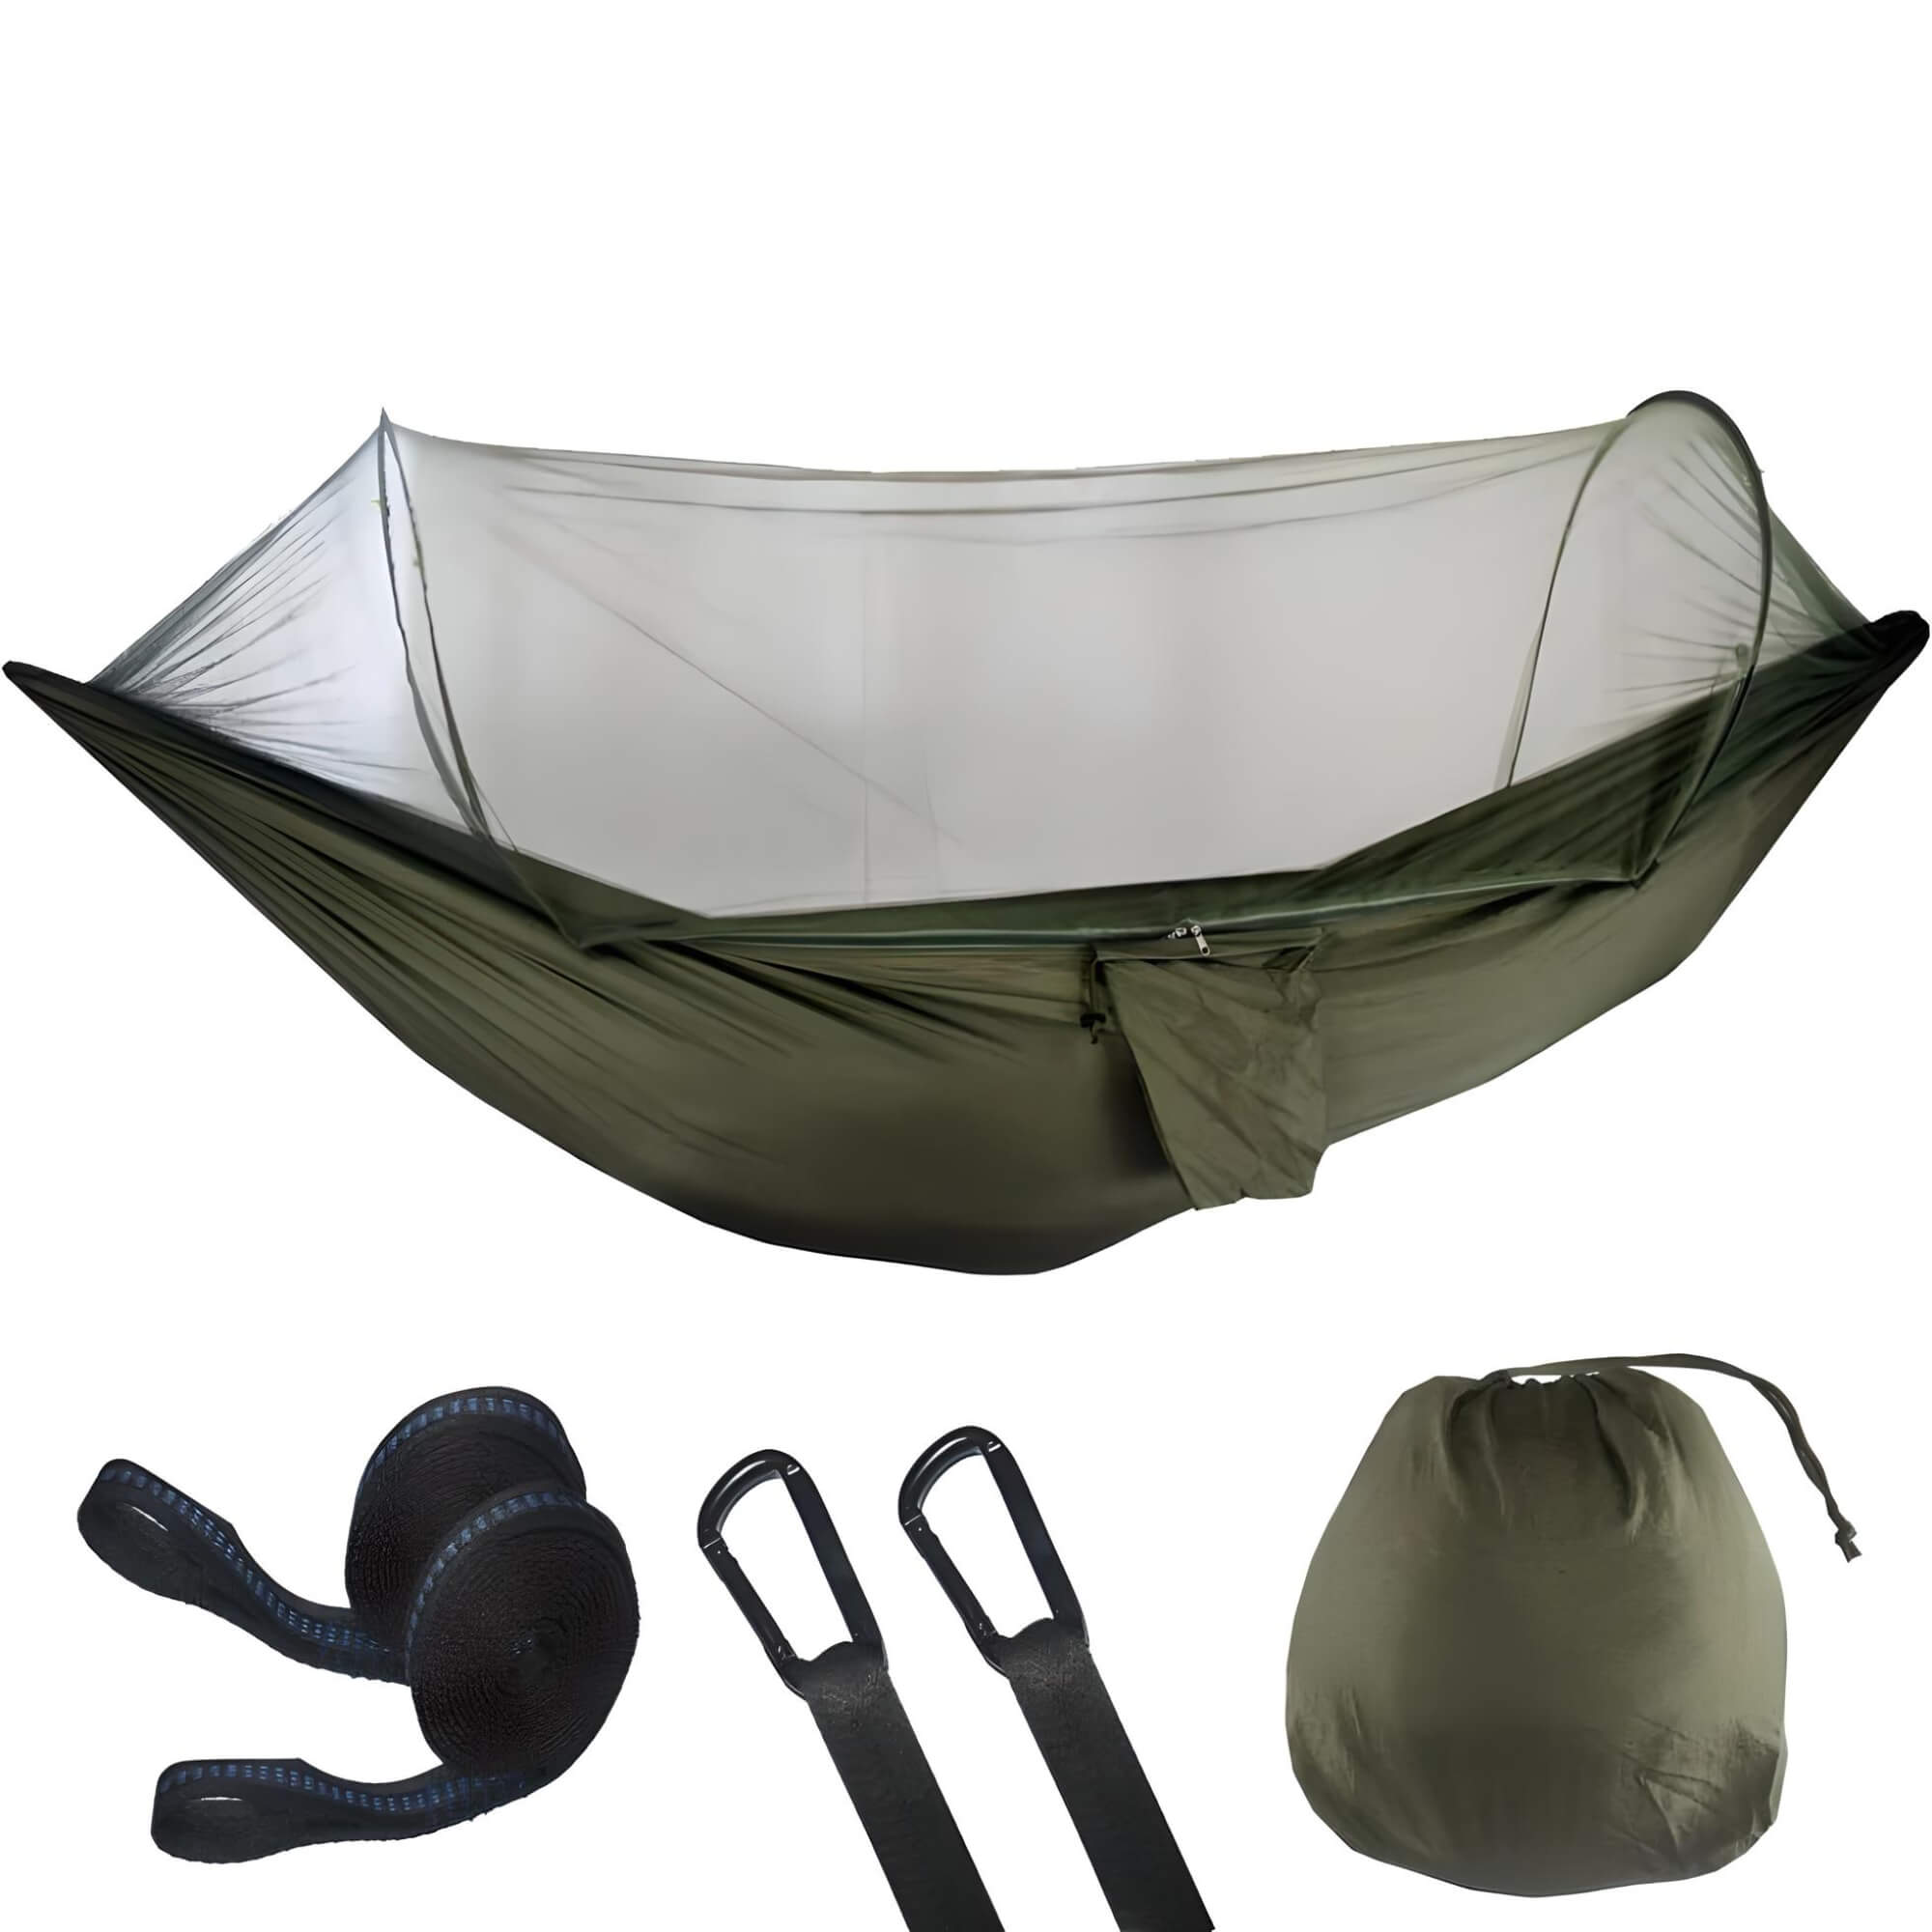 lightest-back-packing-hammock-army-green-color